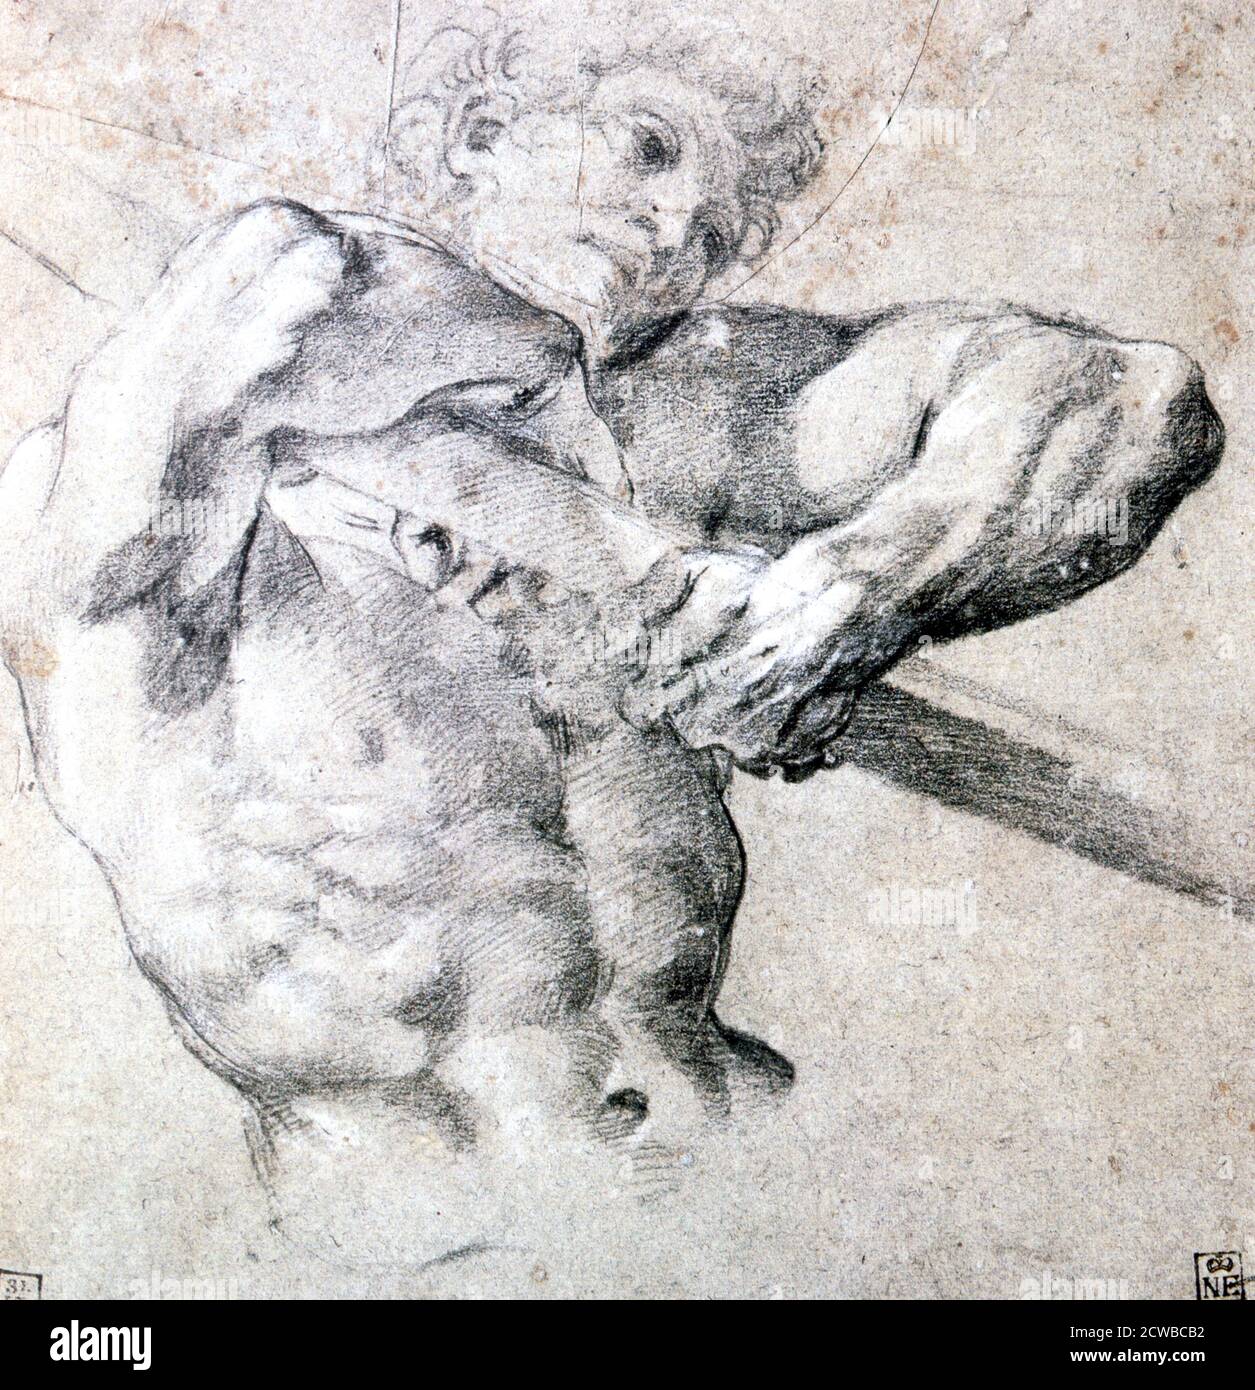 A charcoal illustration by Lodovico Carracci titled 'Study of a Figure', c1575-1619. From the collection of the Museum of Fine Arts, Budapest, Hungary. Stock Photo